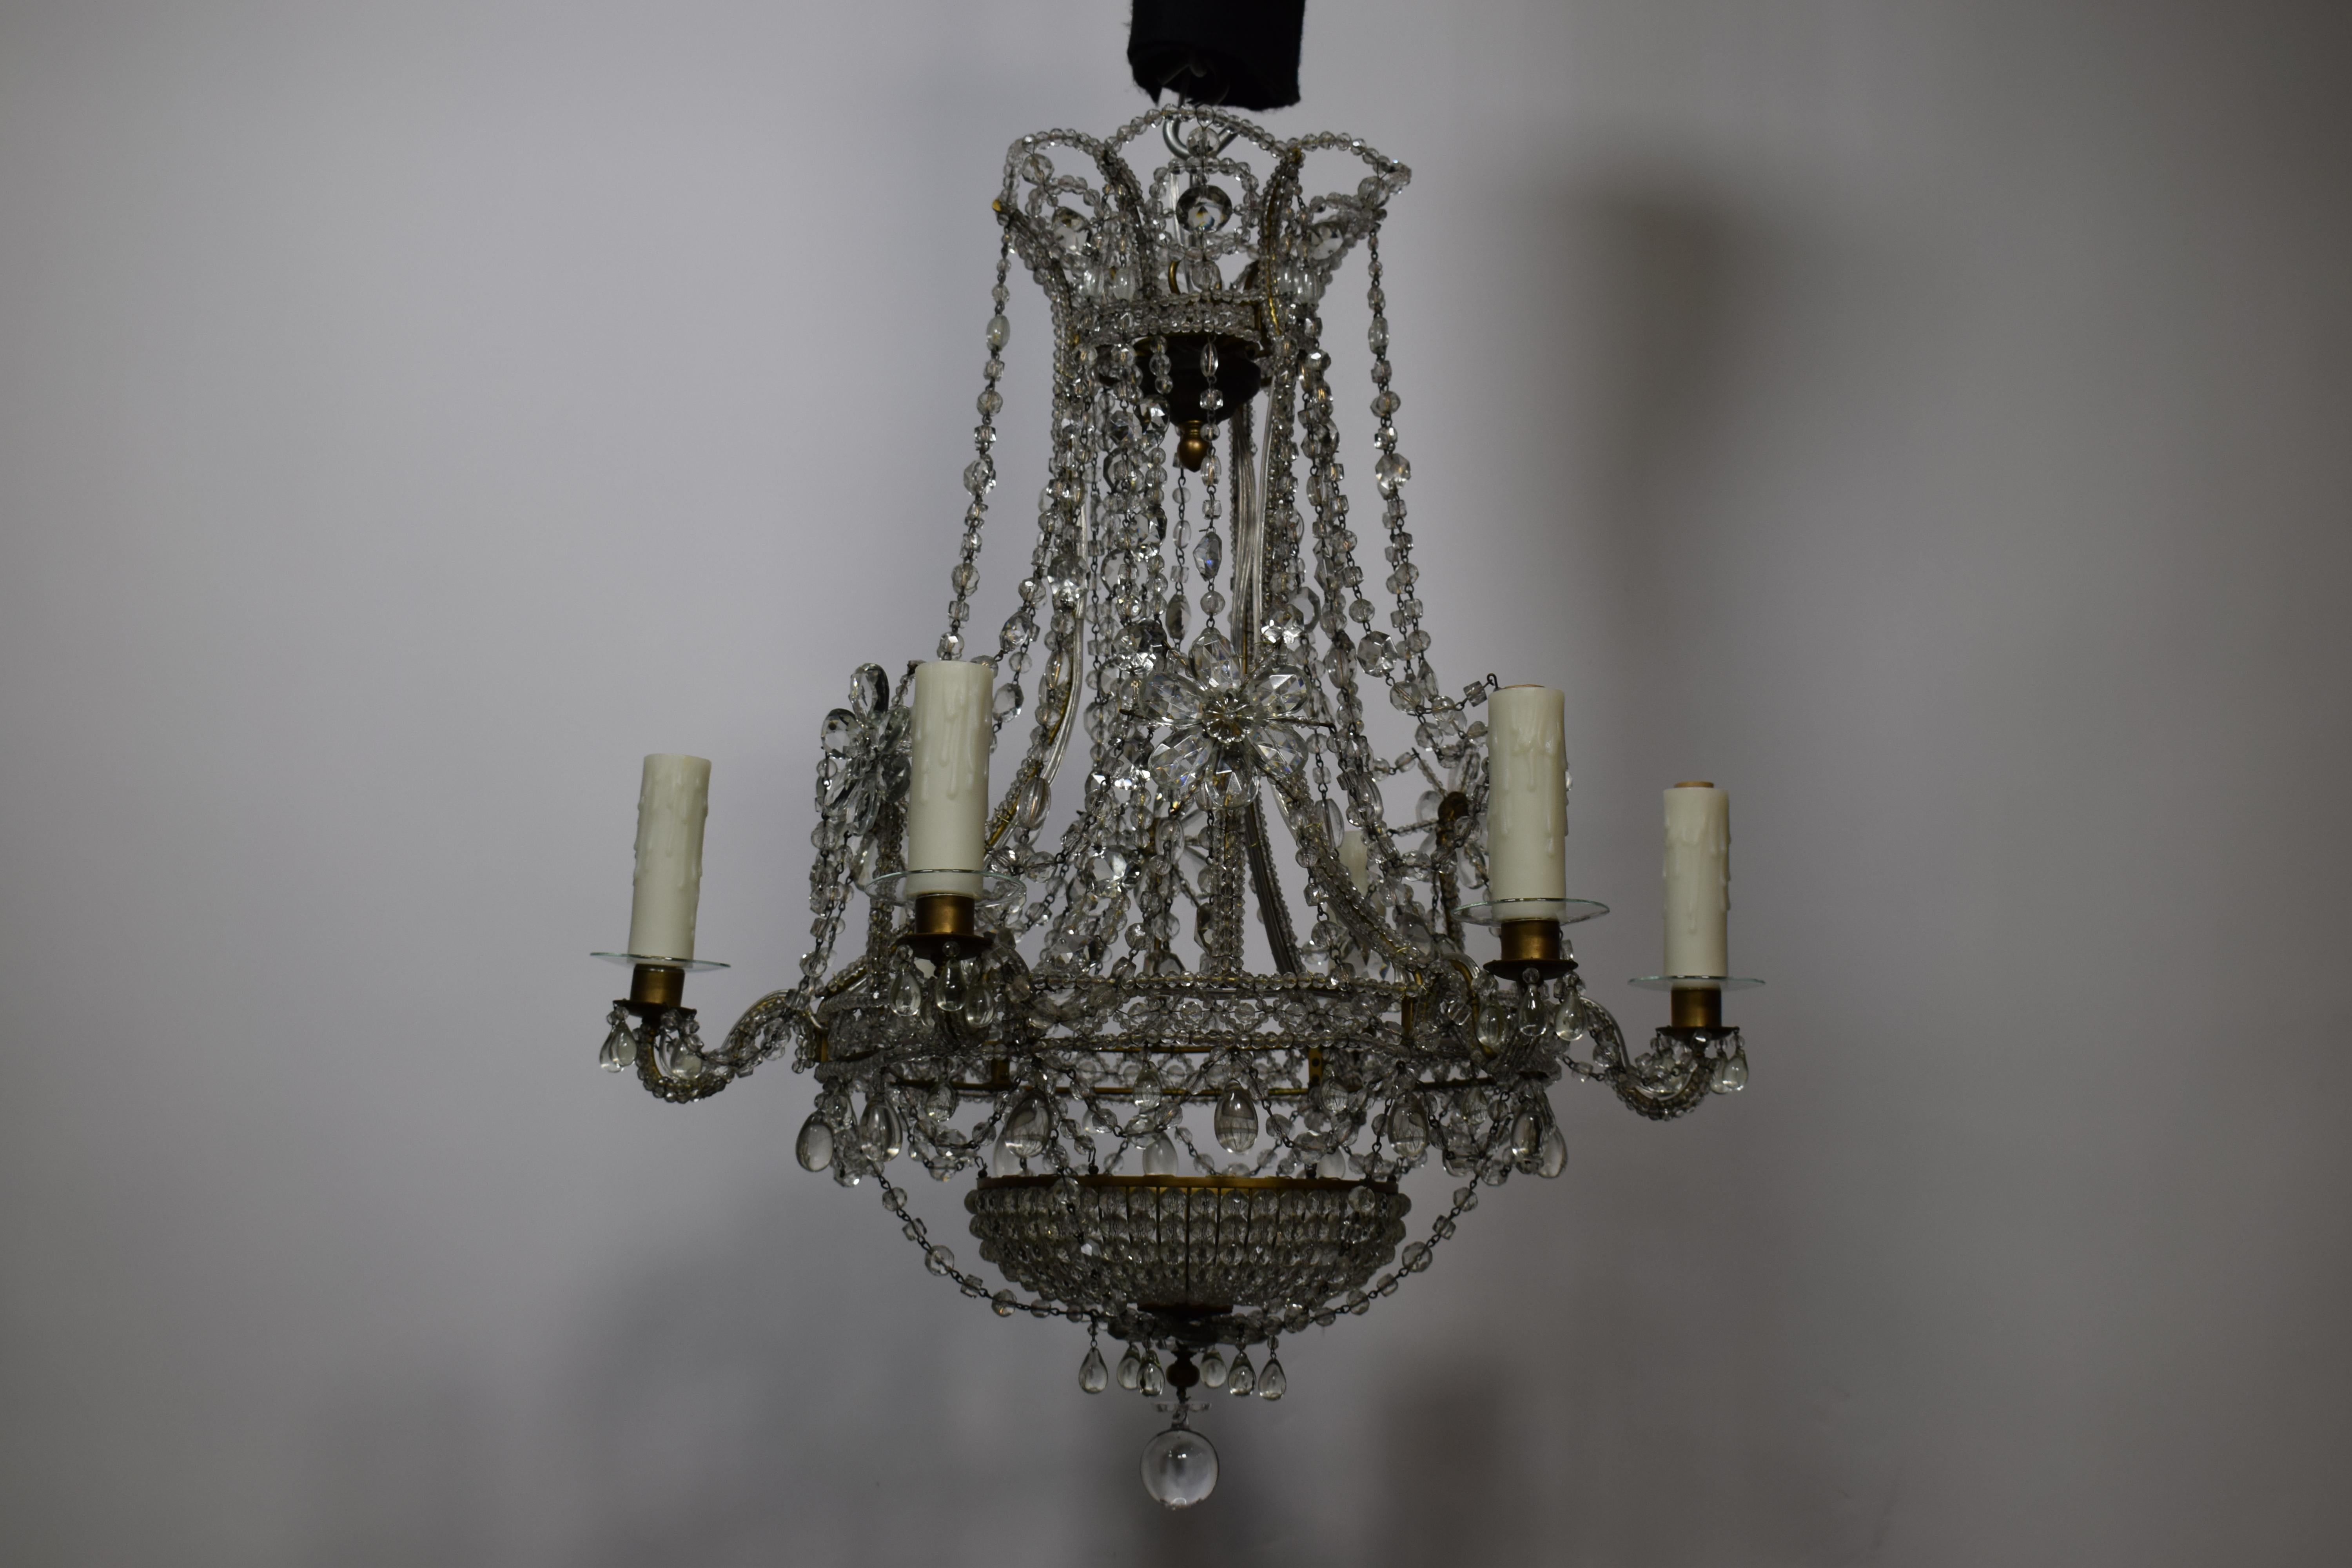 A very fine and decorative Baltic crystal chandelier. Exquisite crystal pinning work.
Sweden, circa 1900. 6 lights
Dimensions: height 27 x diameter 24.
CW4660.